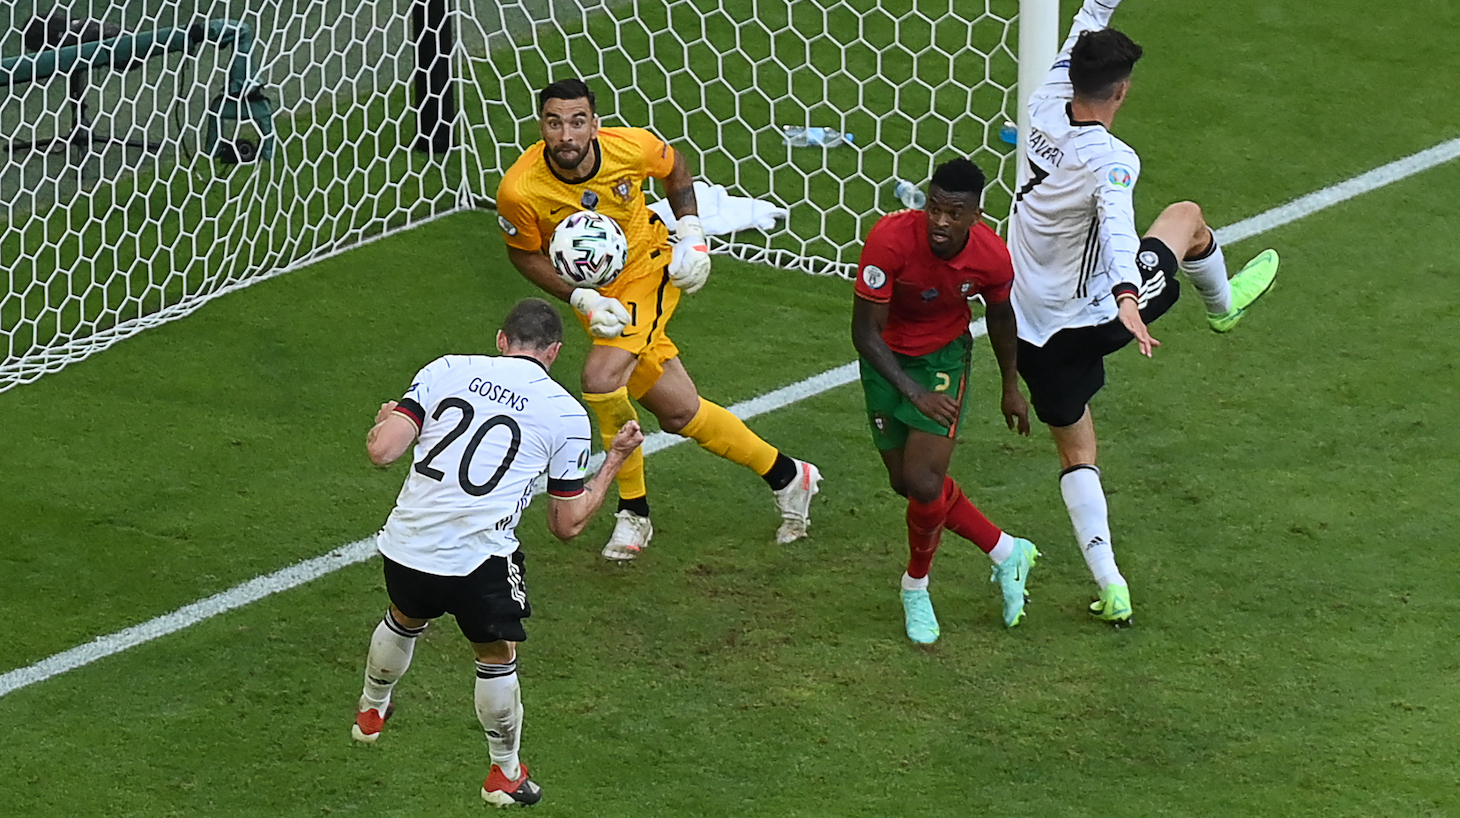 Germany's defender Robin Gosens (L) heads the ball to score their fourth goal during the UEFA EURO 2020 Group F football match between Portugal and Germany at Allianz Arena in Munich on June 19, 2021.